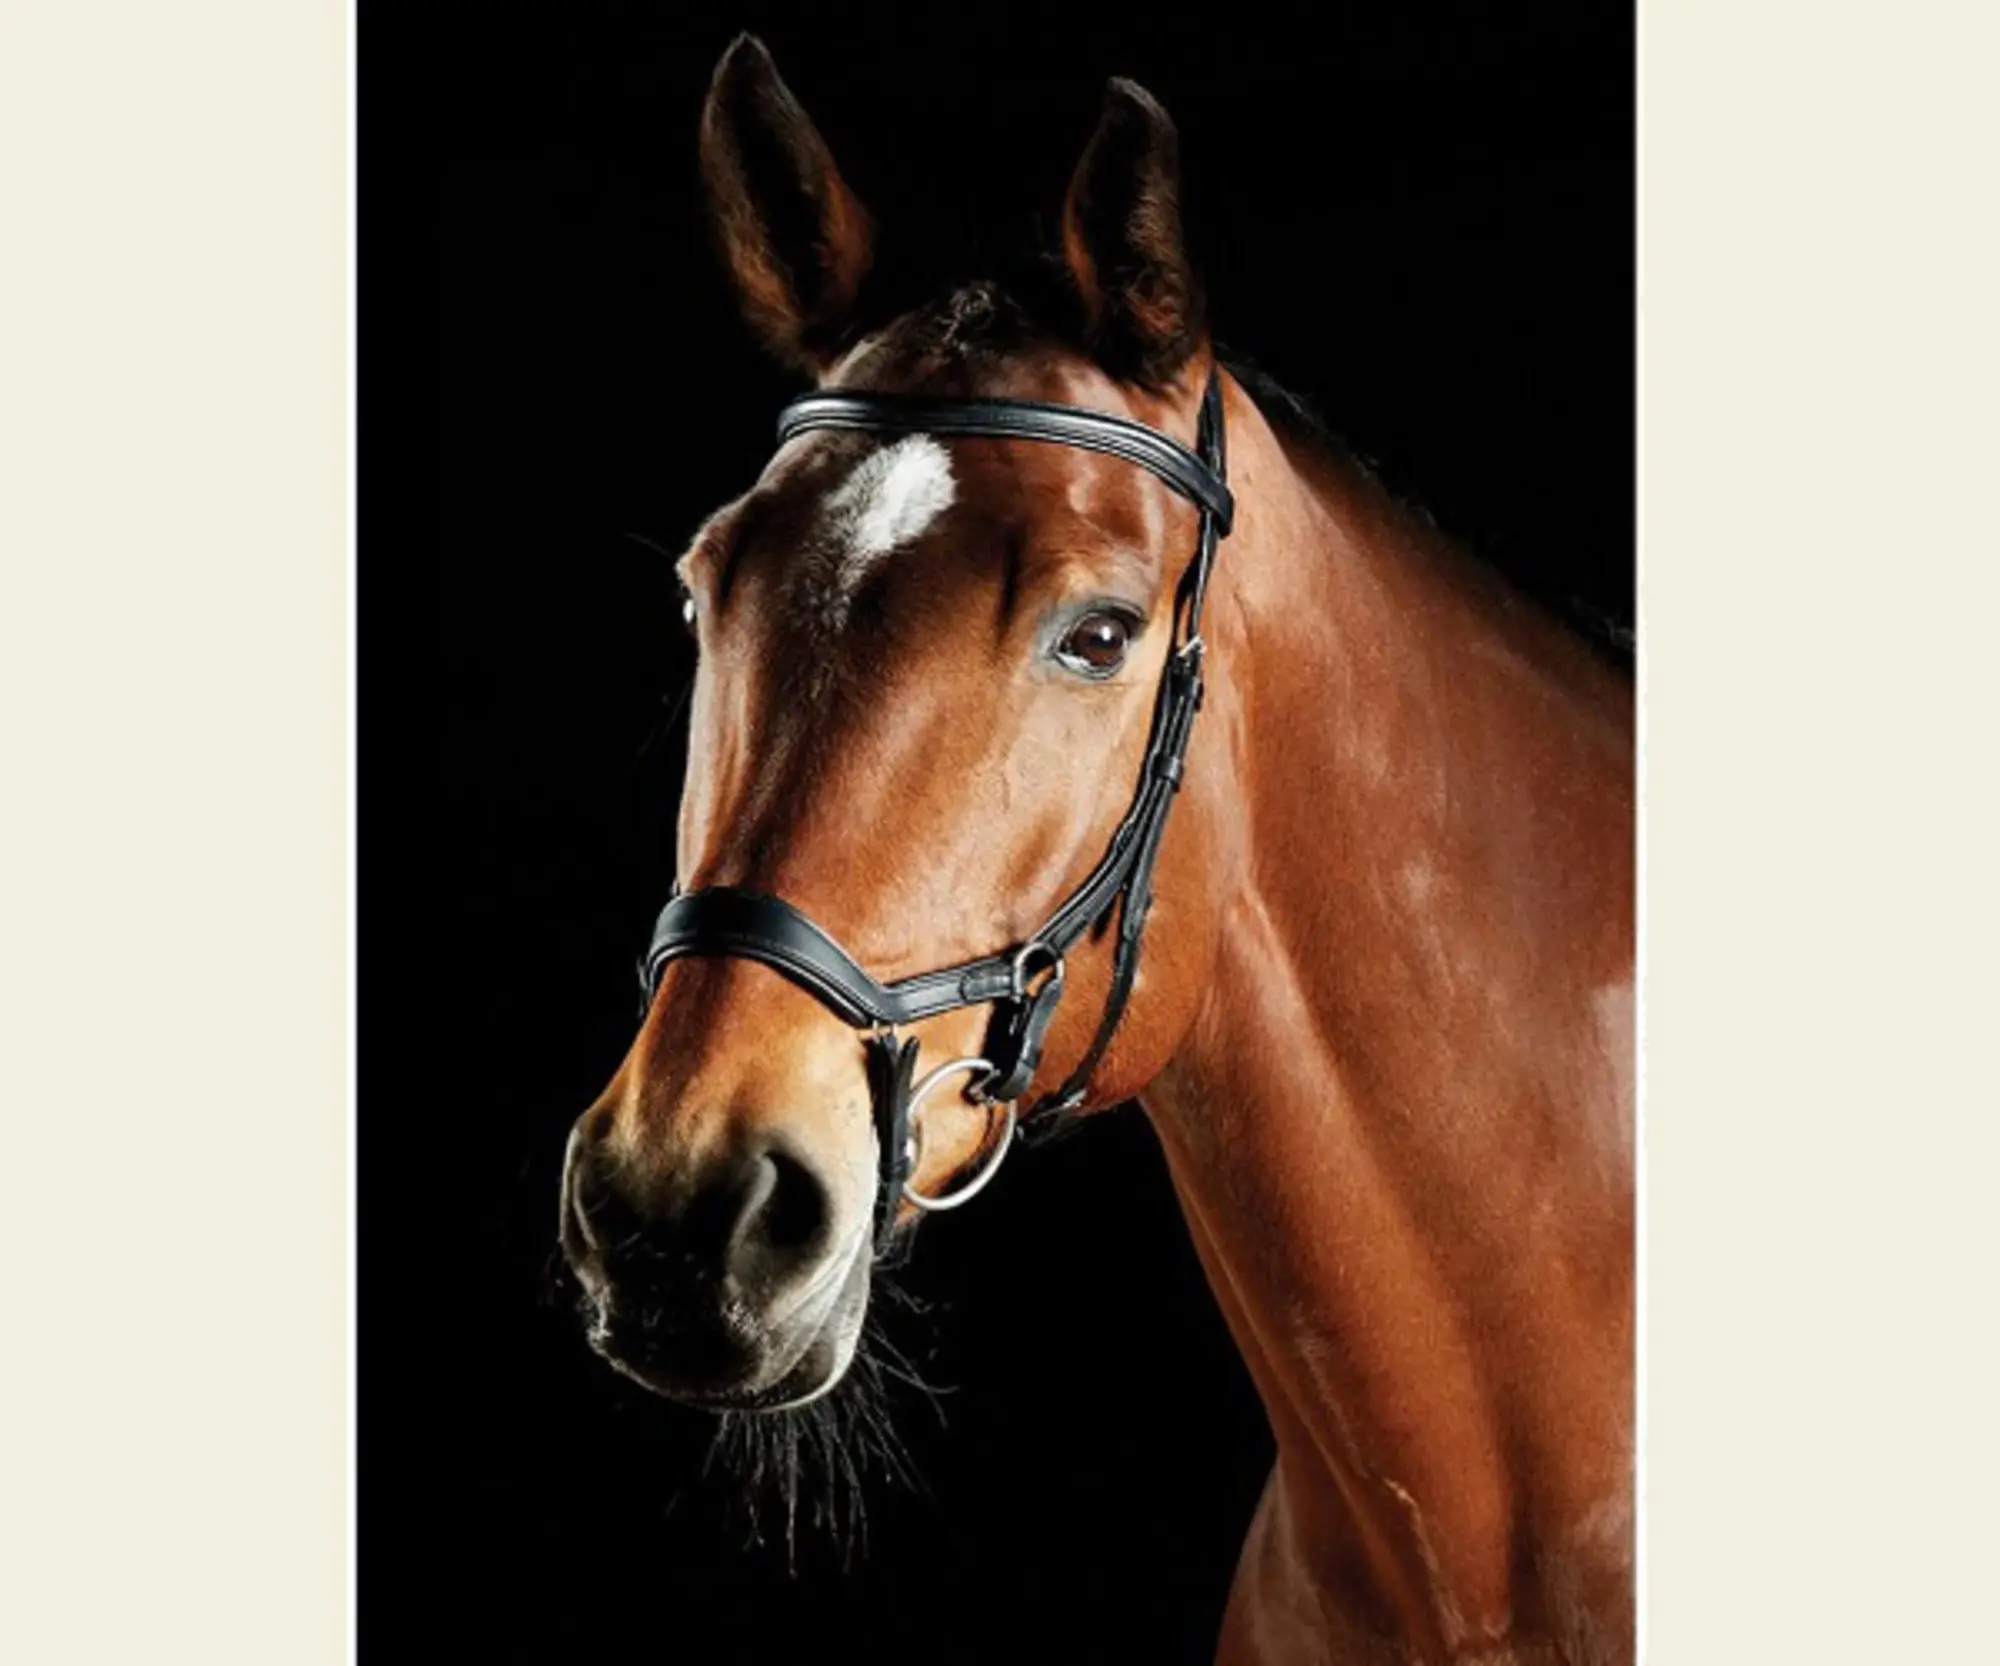 Comfitec Daina Bridle Anatomical headpiece features super soft padding throughout and is wider shaped between the horses